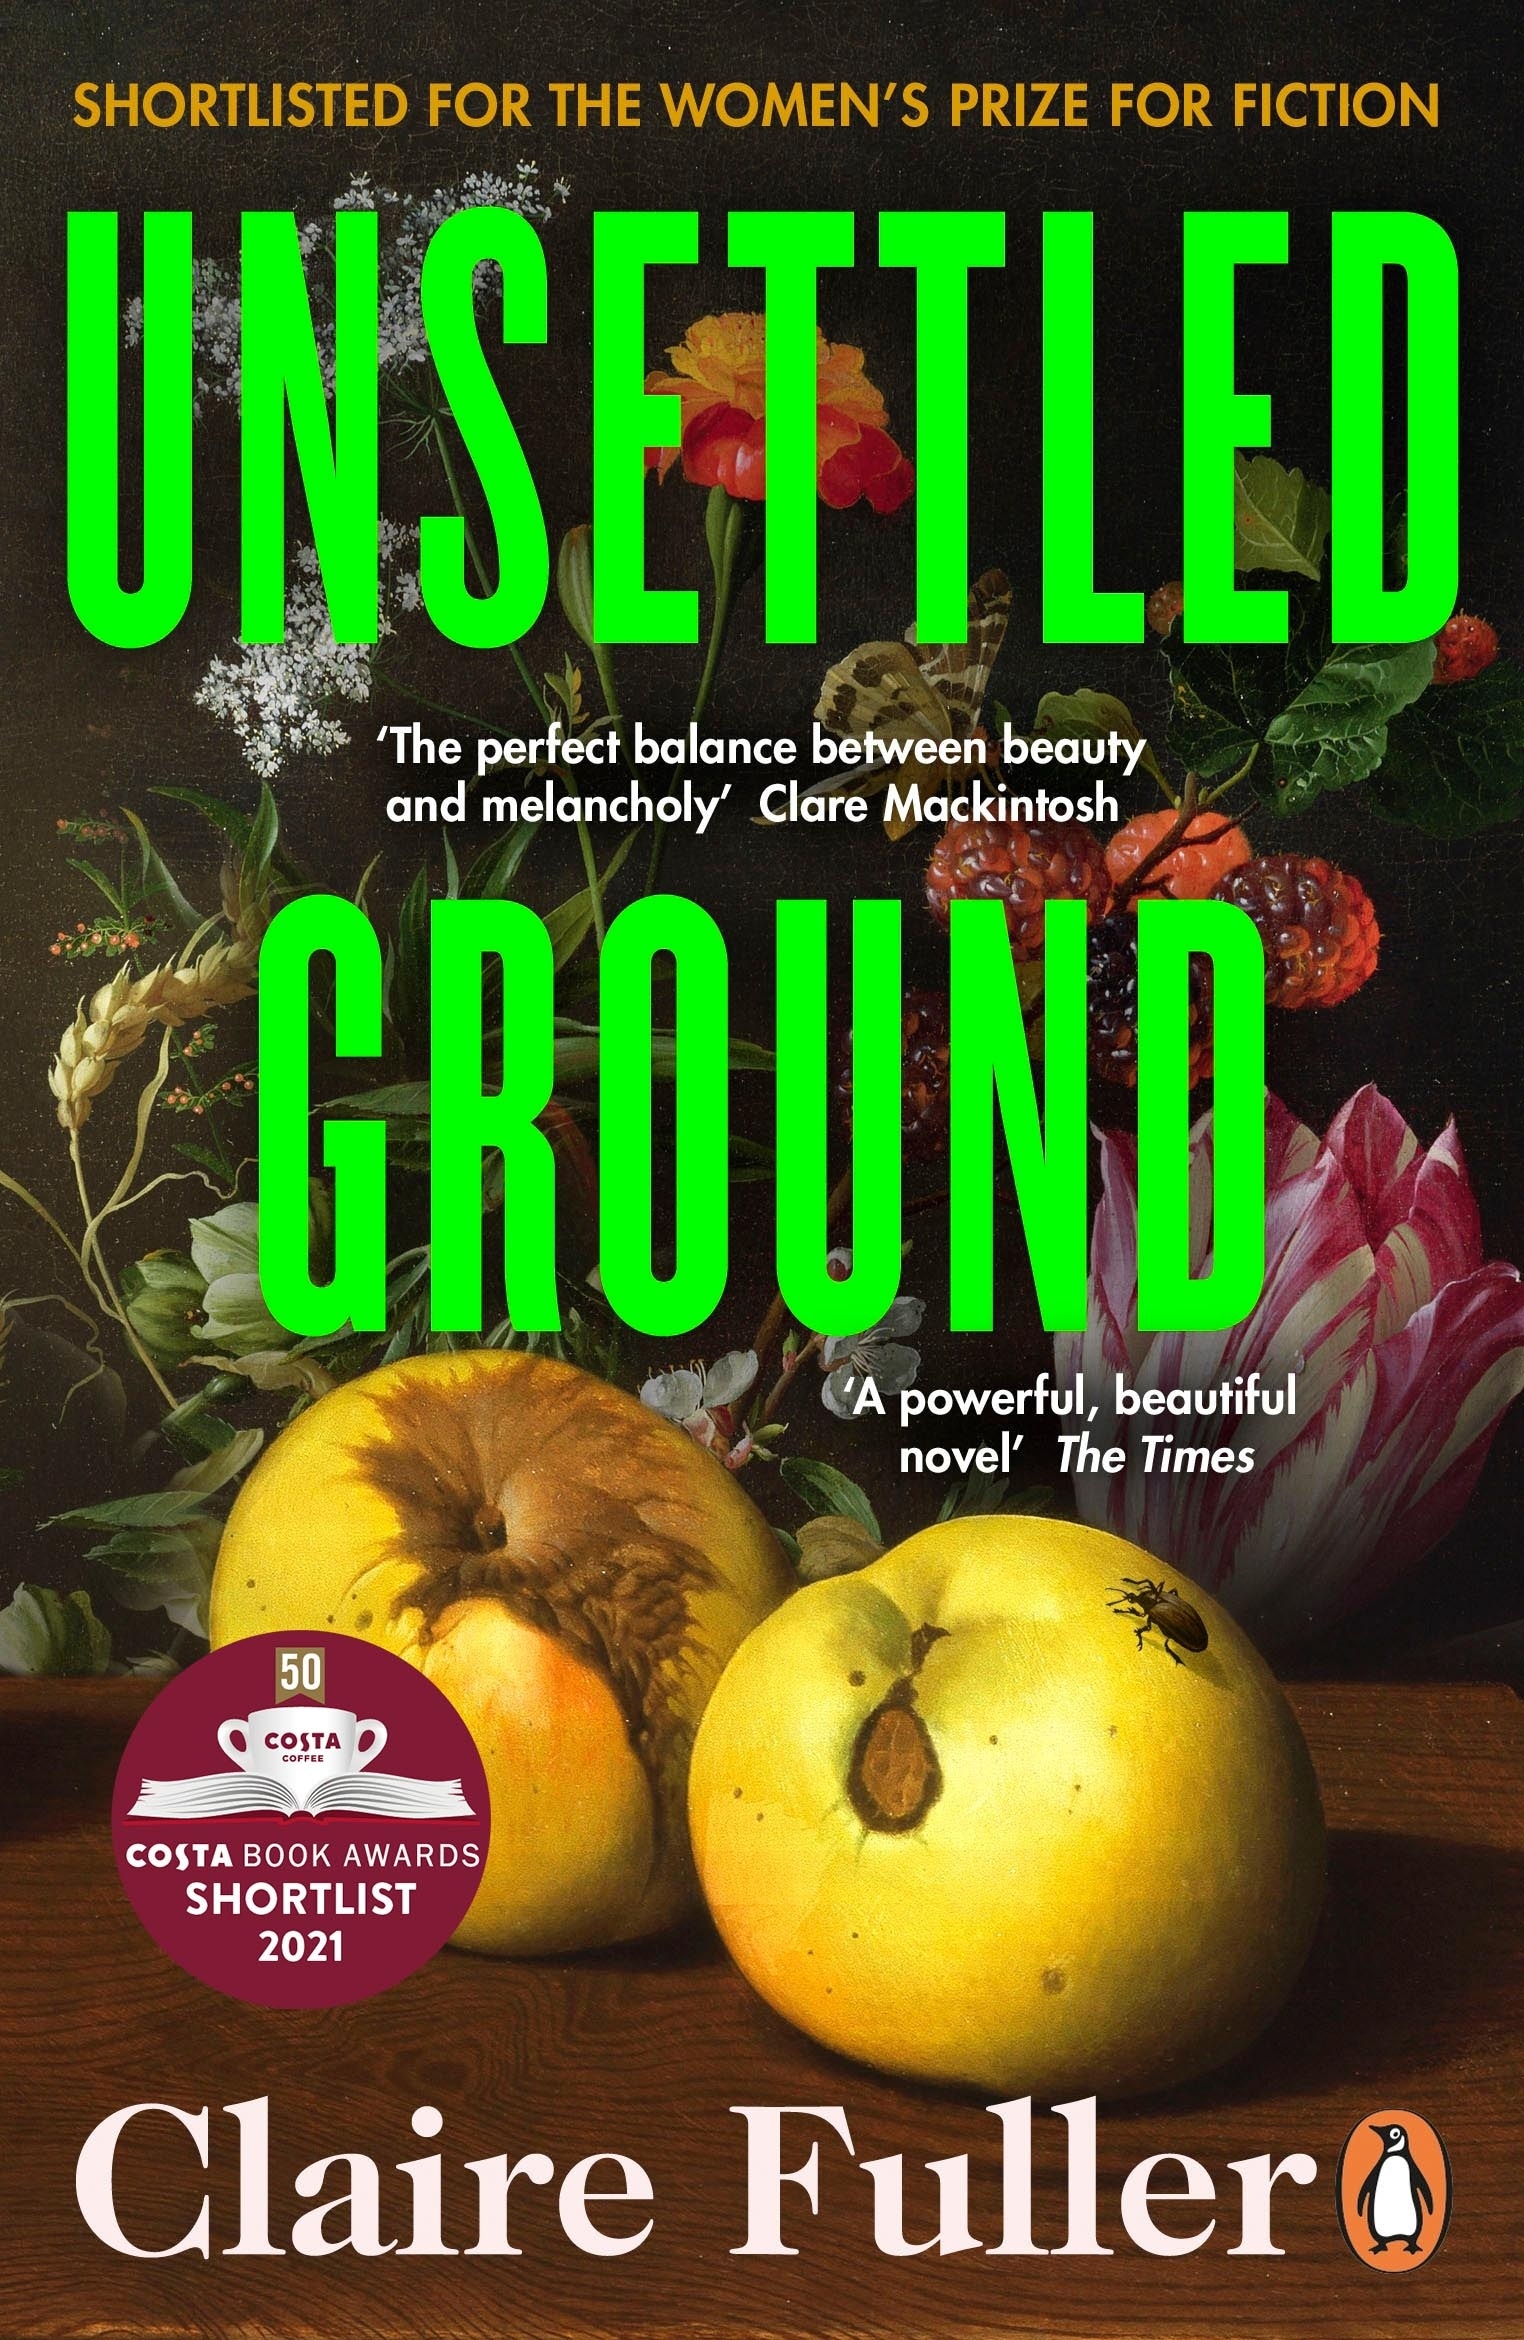 Book “Unsettled Ground” by Claire Fuller — January 13, 2022